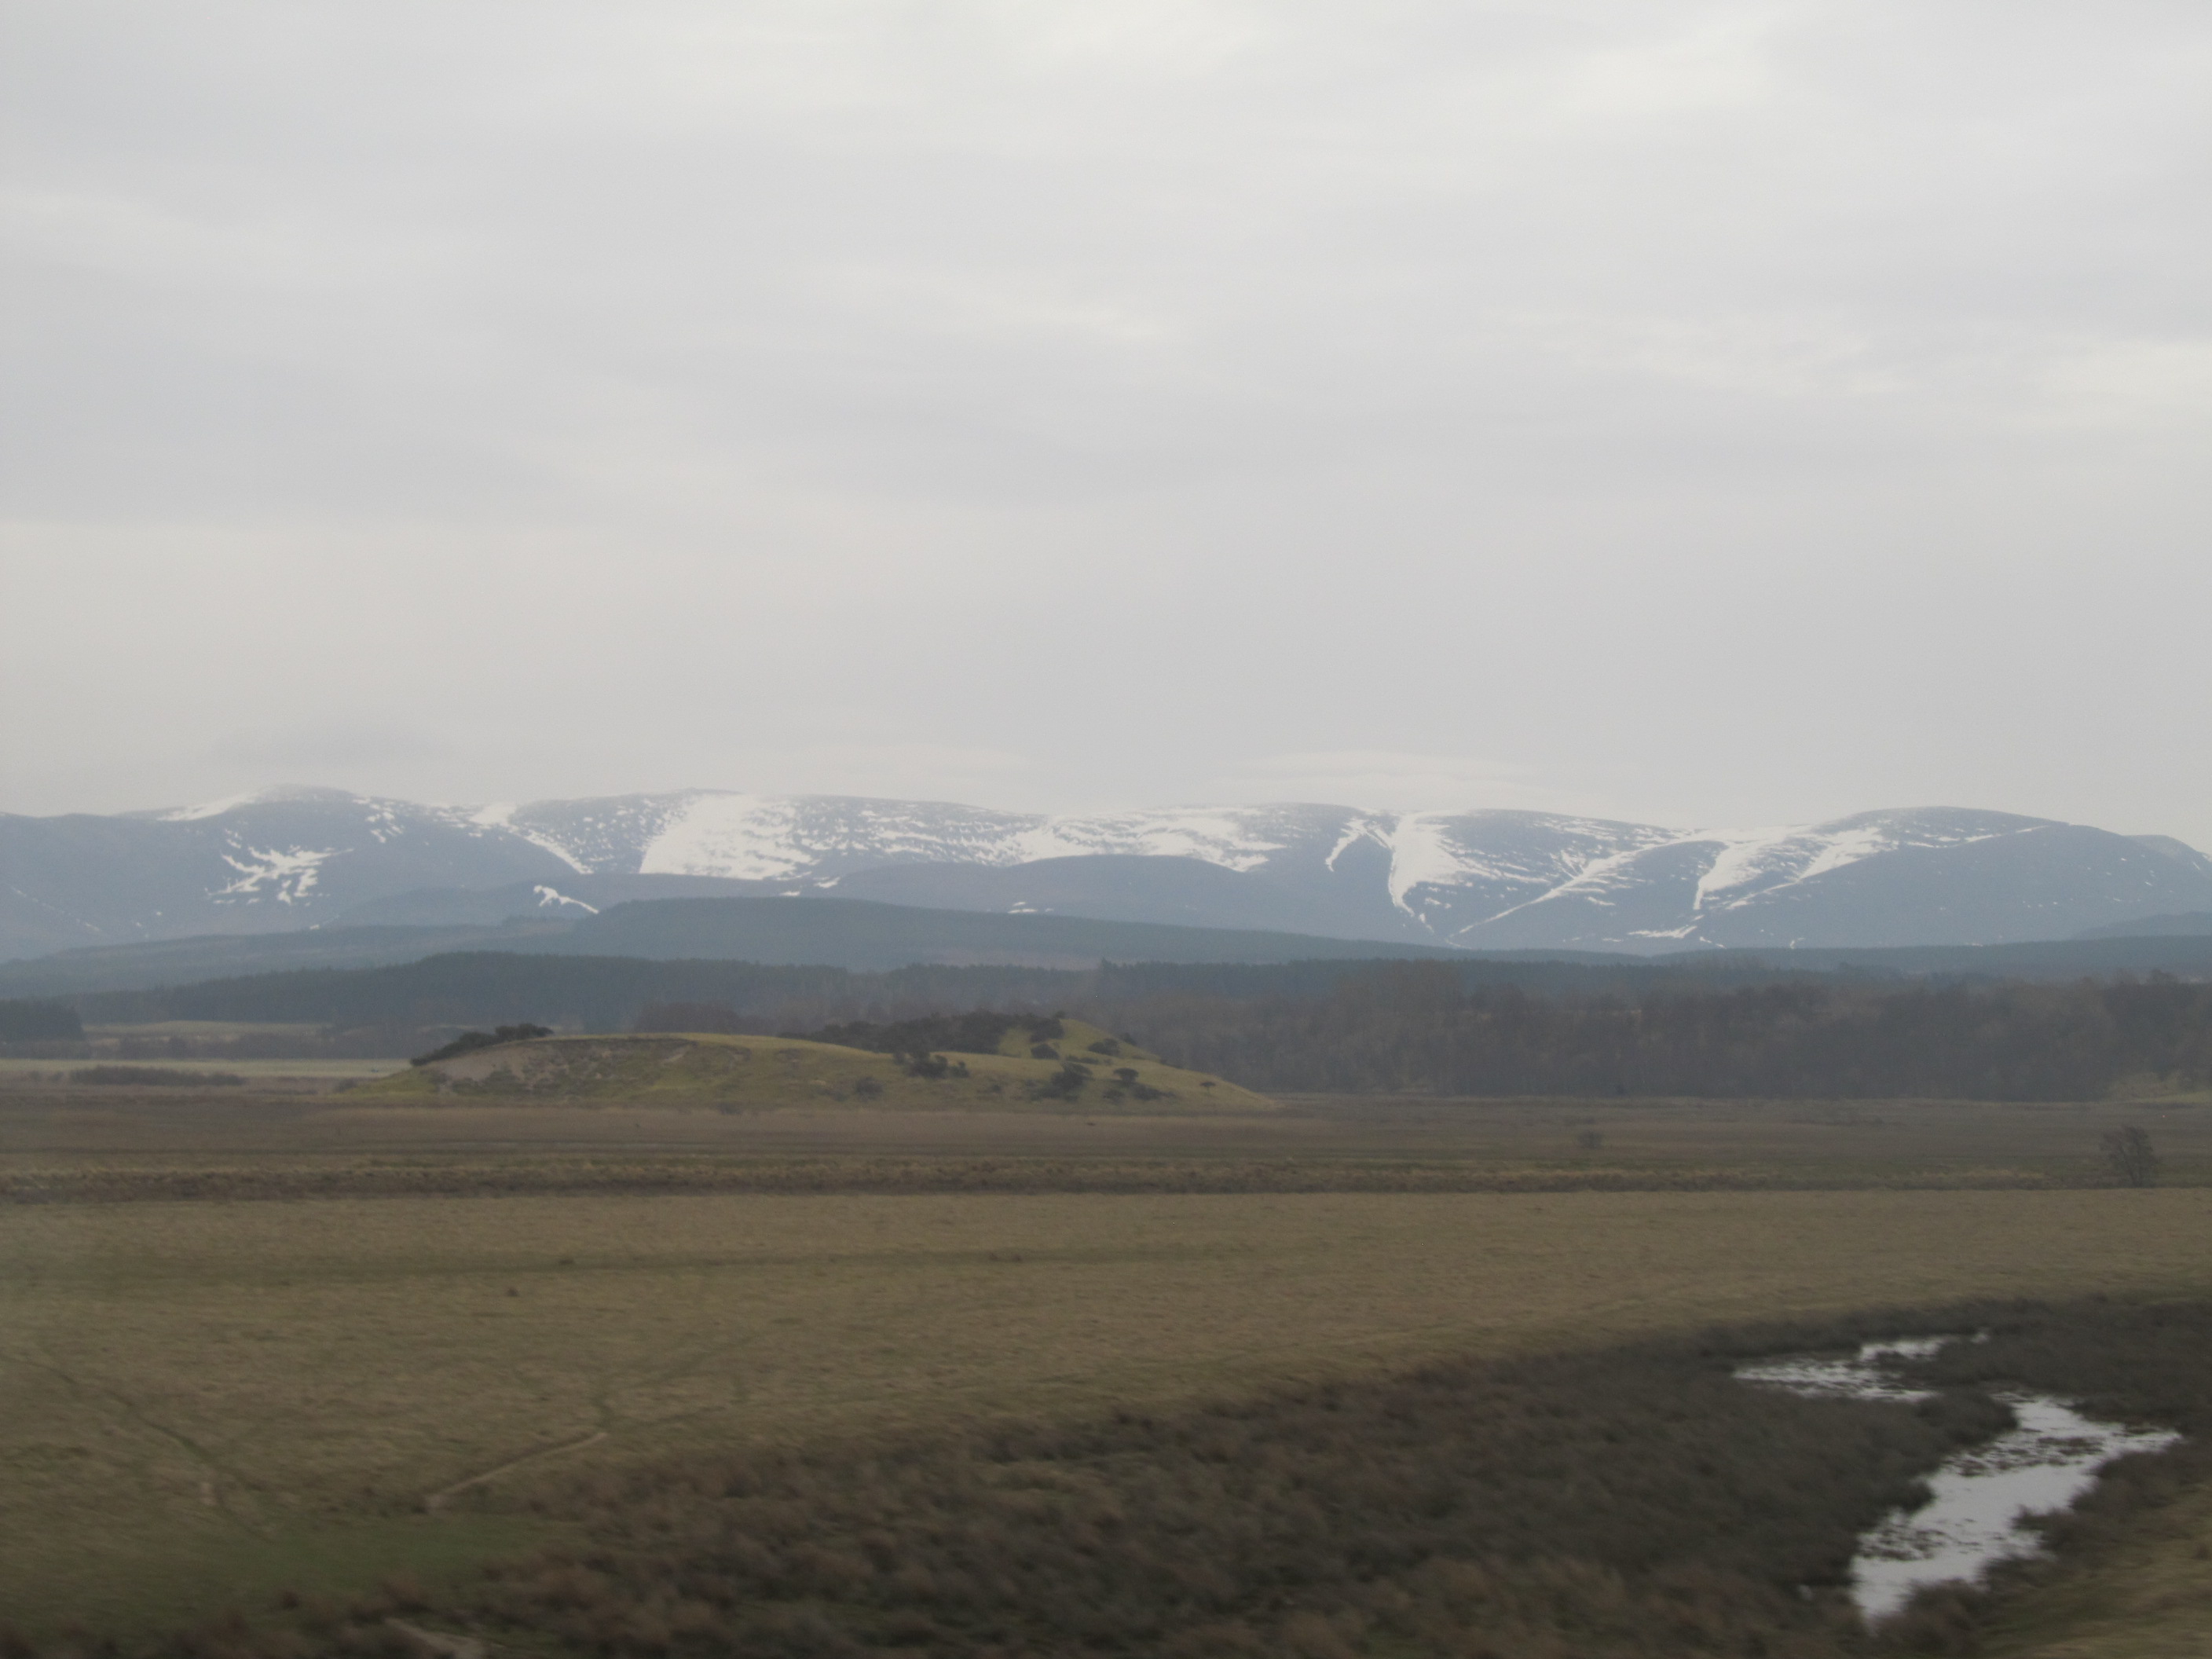 Cairngorn Mountains from the road to Aviemore